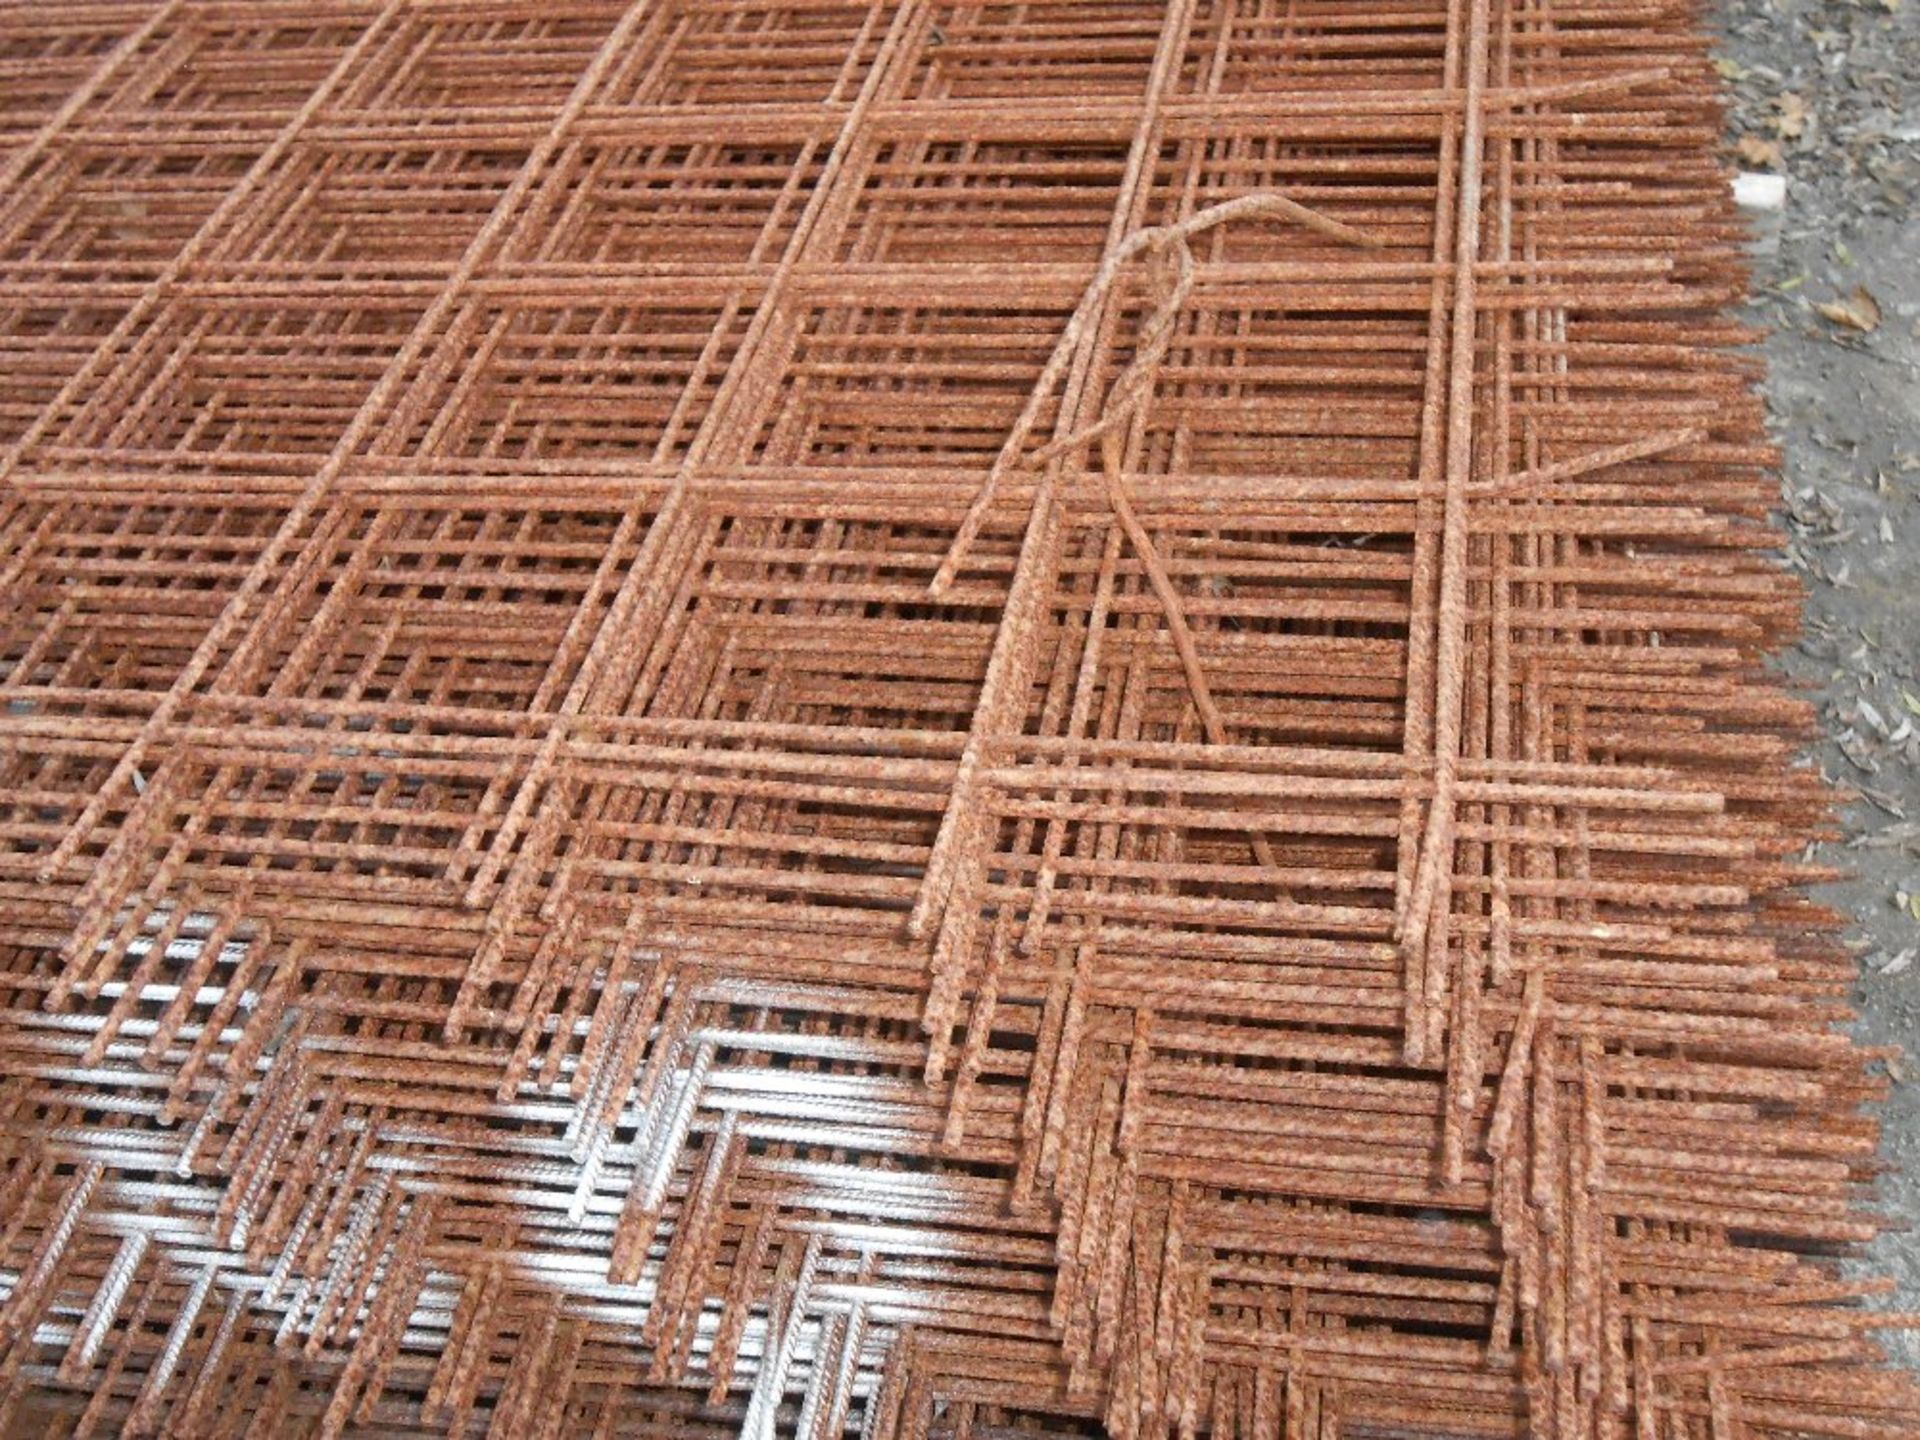 100no. (2 Packs of 50no.) 1200 x 2400mm concrete reinforcing mesh sheets 150mm squares 5mm thick. - Image 3 of 3